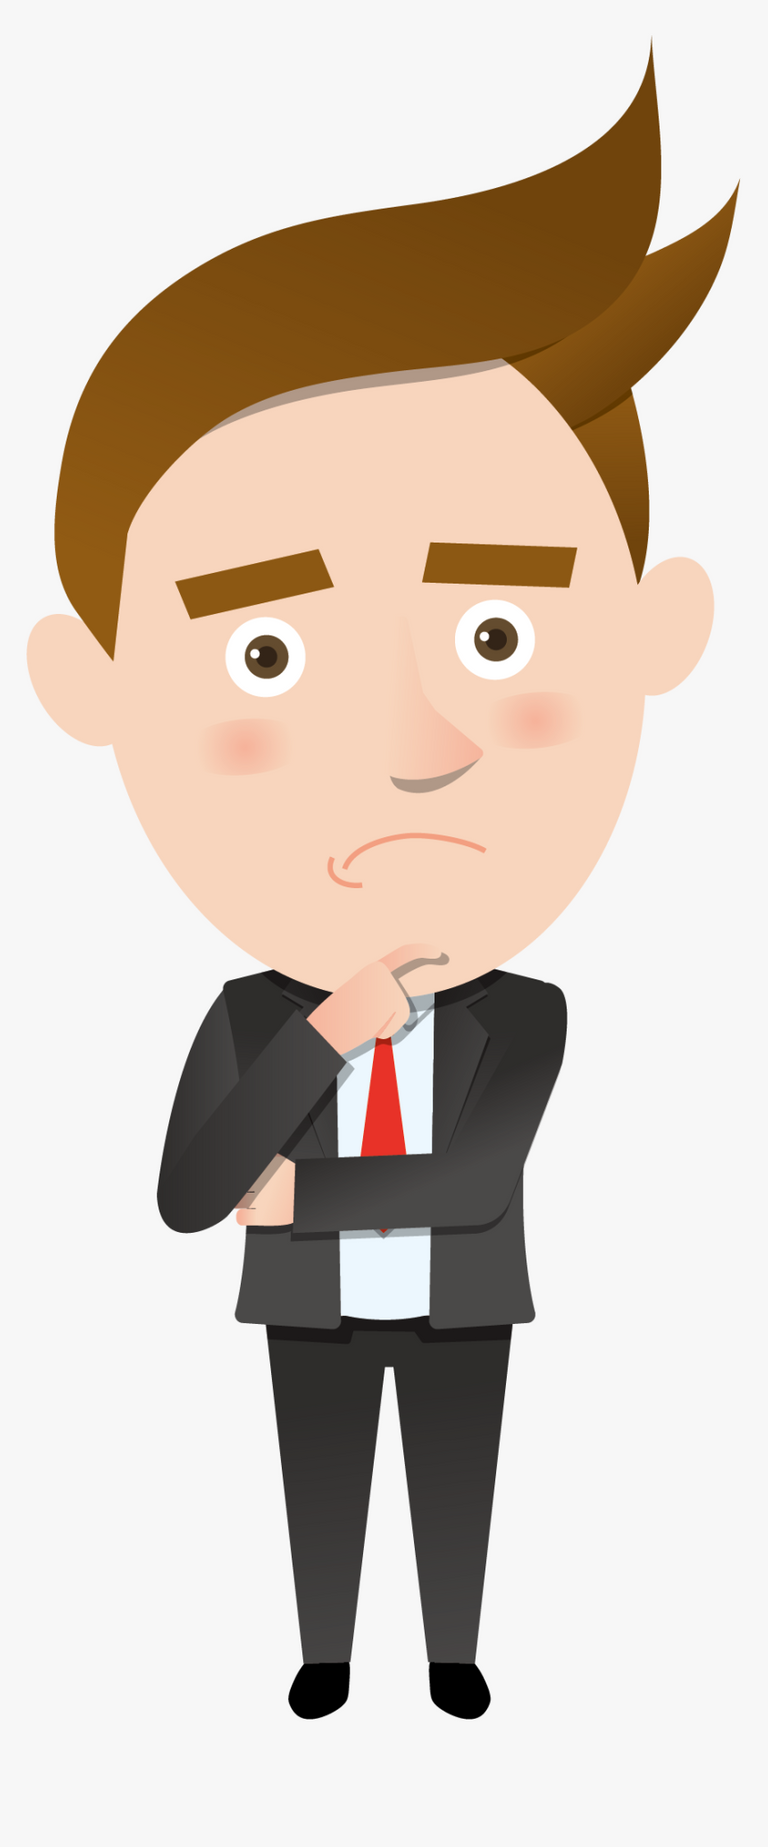 271-2710476_person-clip-art-animation-thinking-man-png-transparent.png